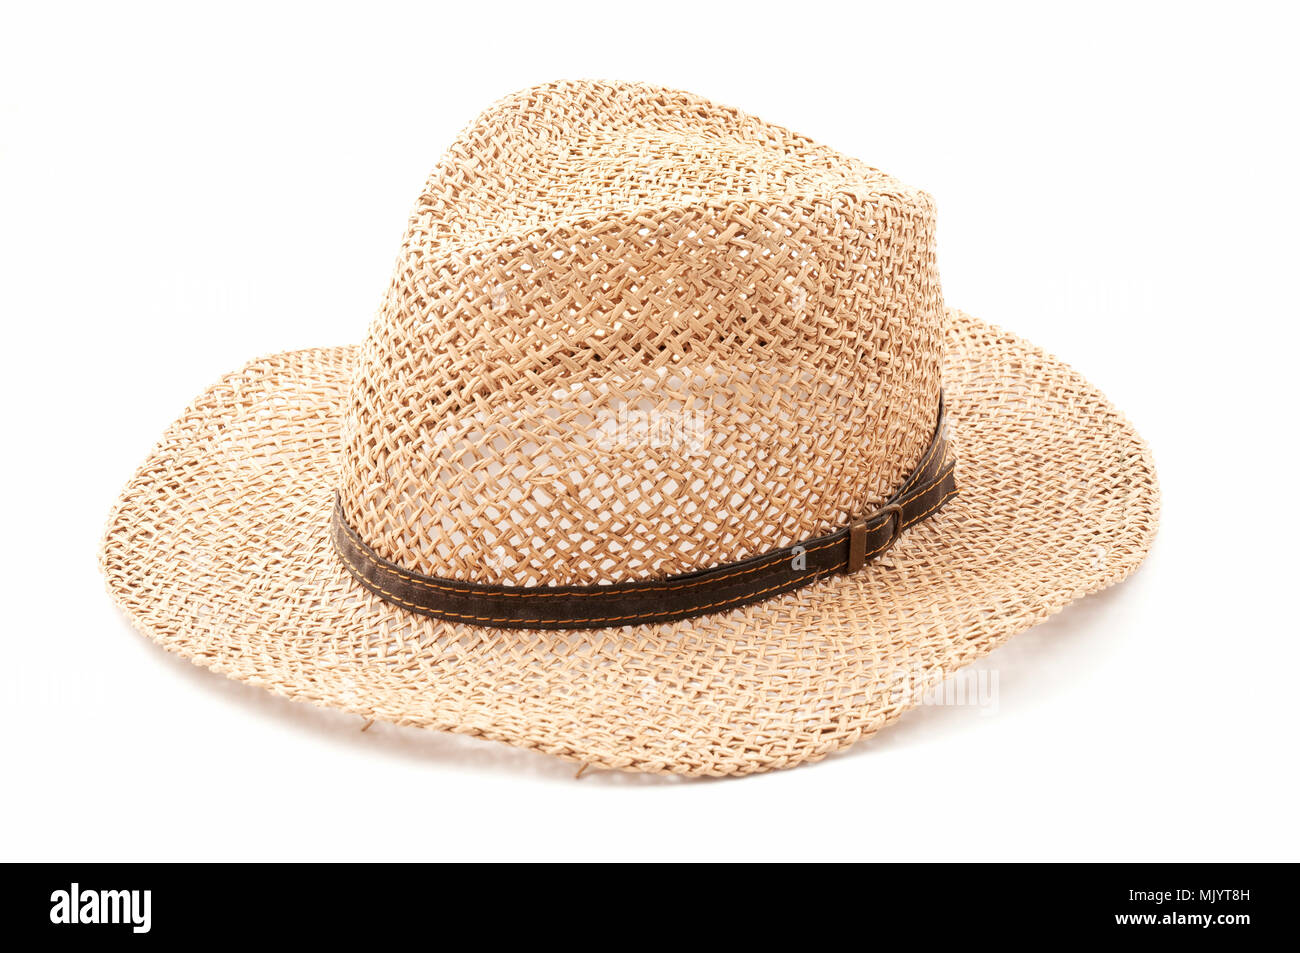 A straw hat on a white background Stock Photo